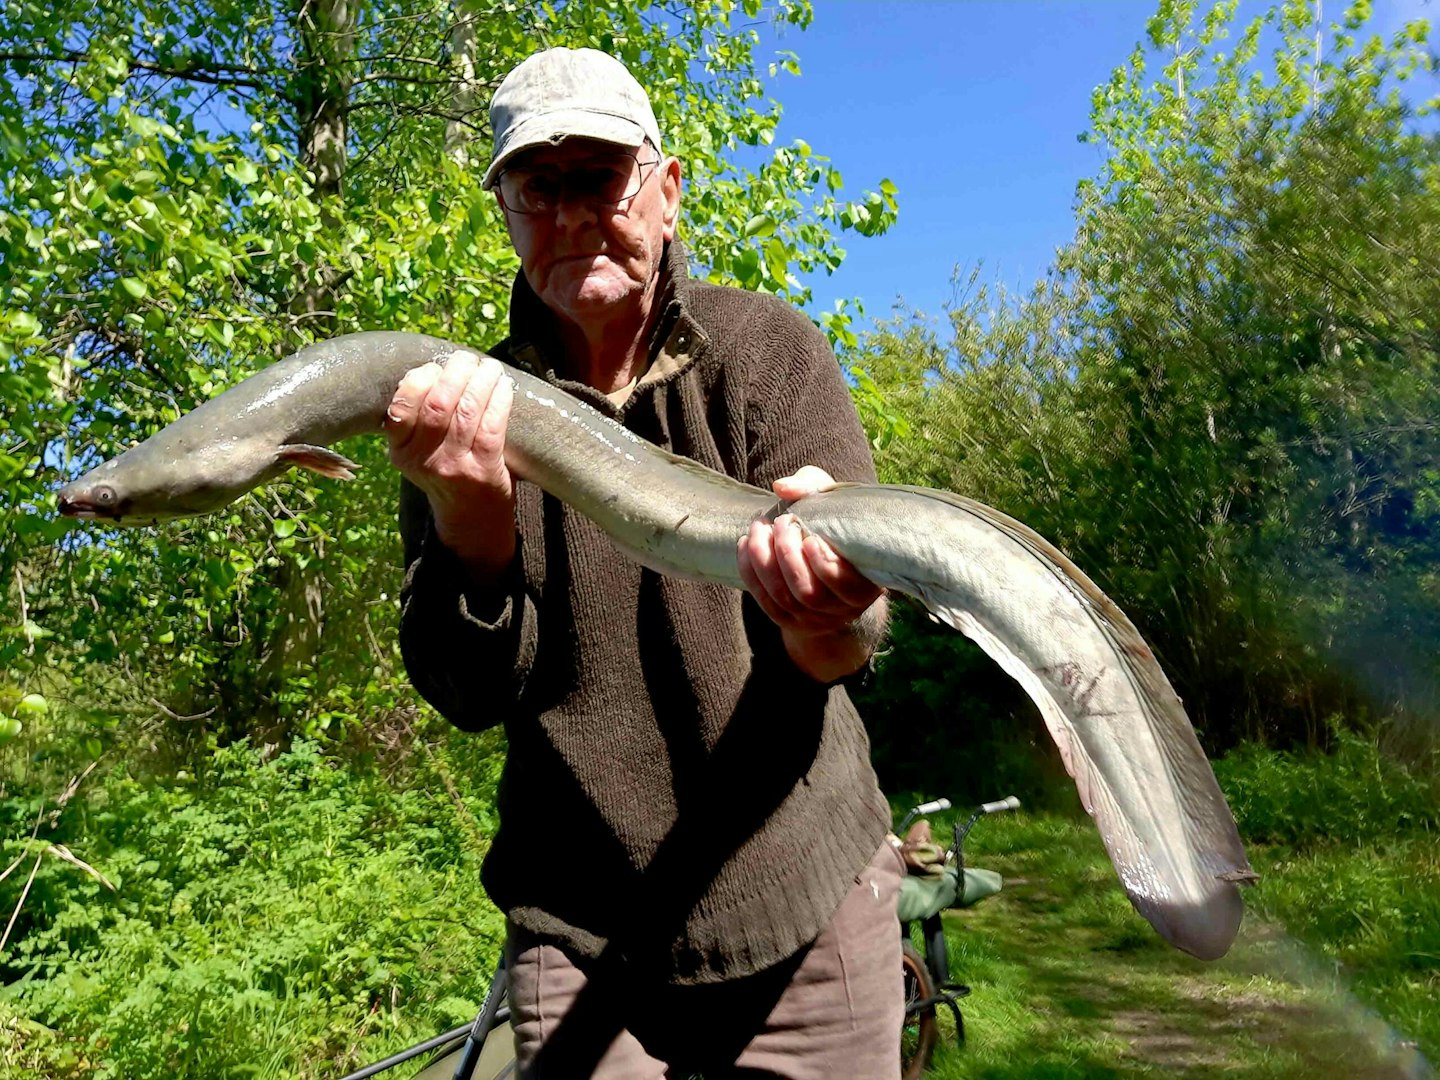 This eel was as strong as a bull” – Dick Stewart